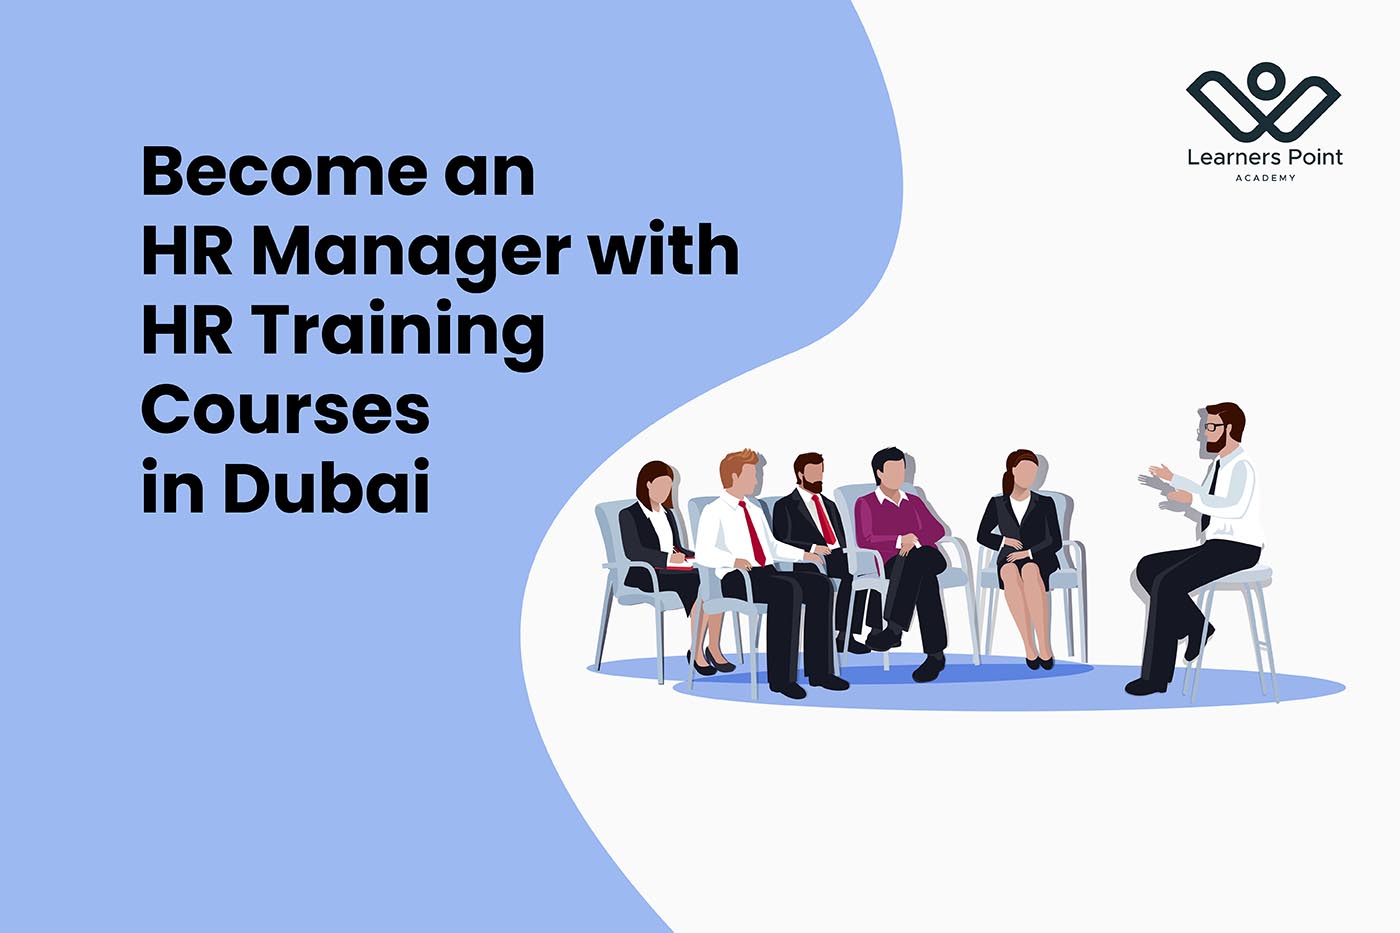 Become an HR Manager with HR Training Courses in Dubai